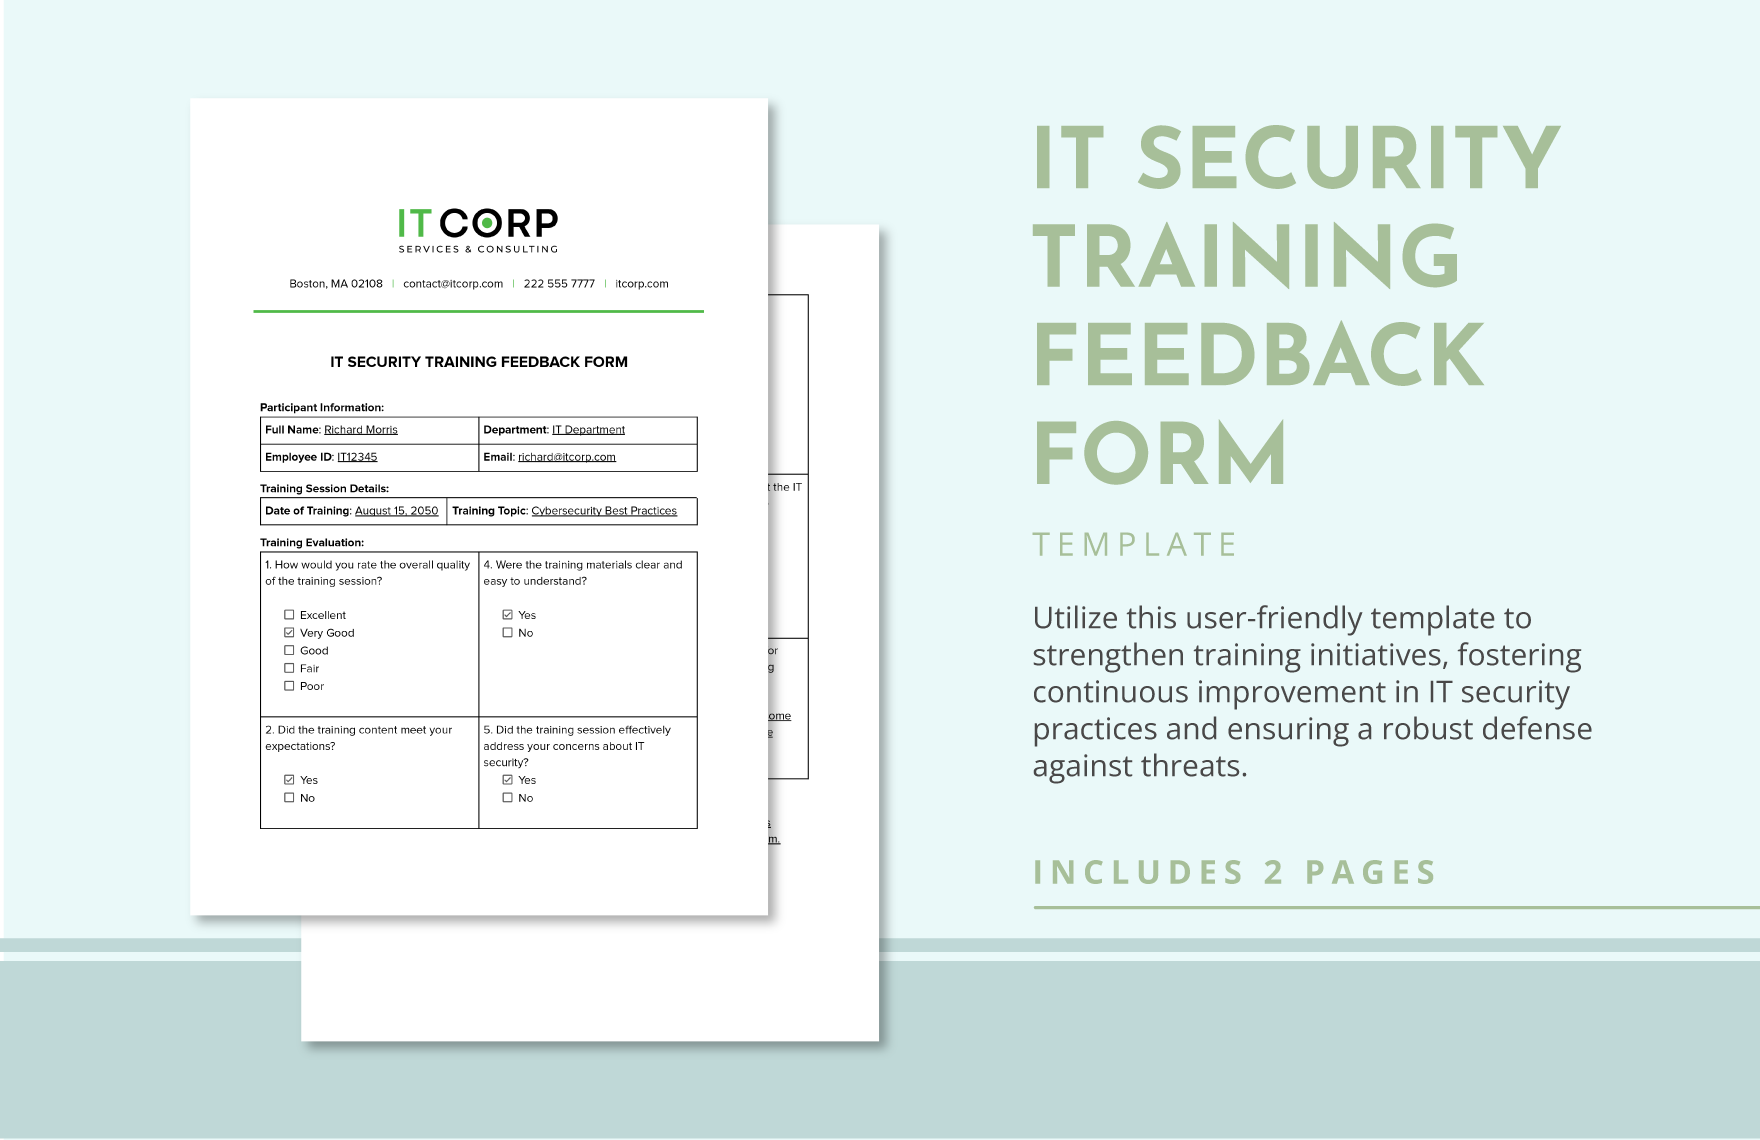 IT Security Training Feedback Form Template